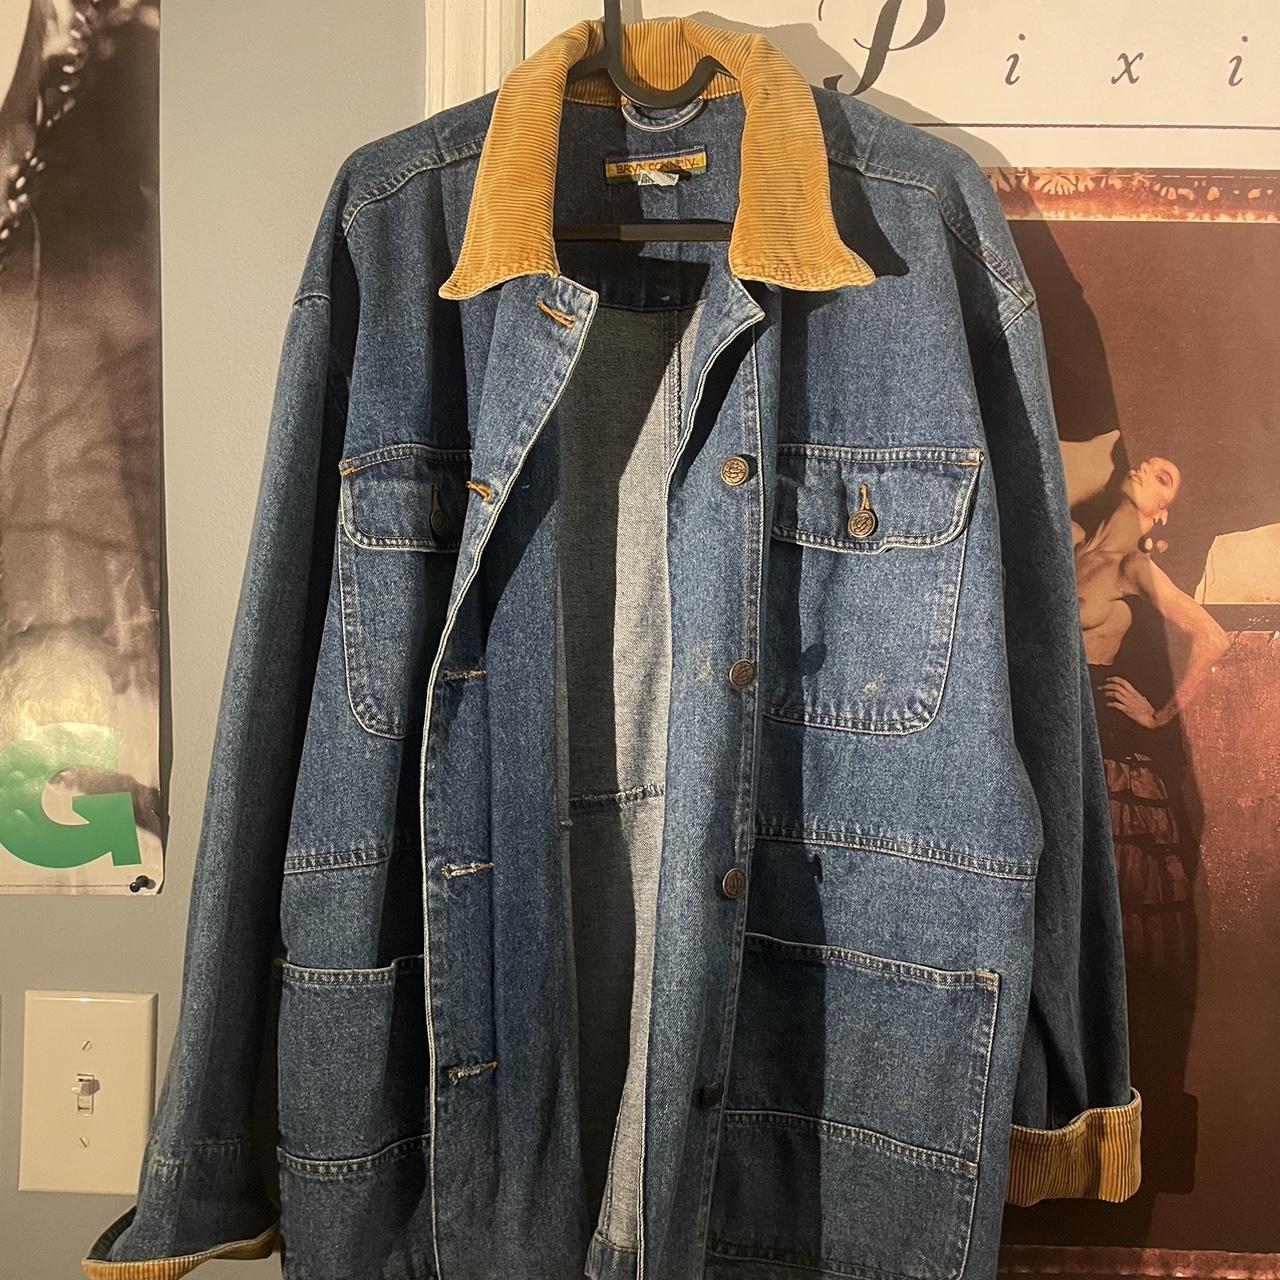 item listed by urbanthrift33